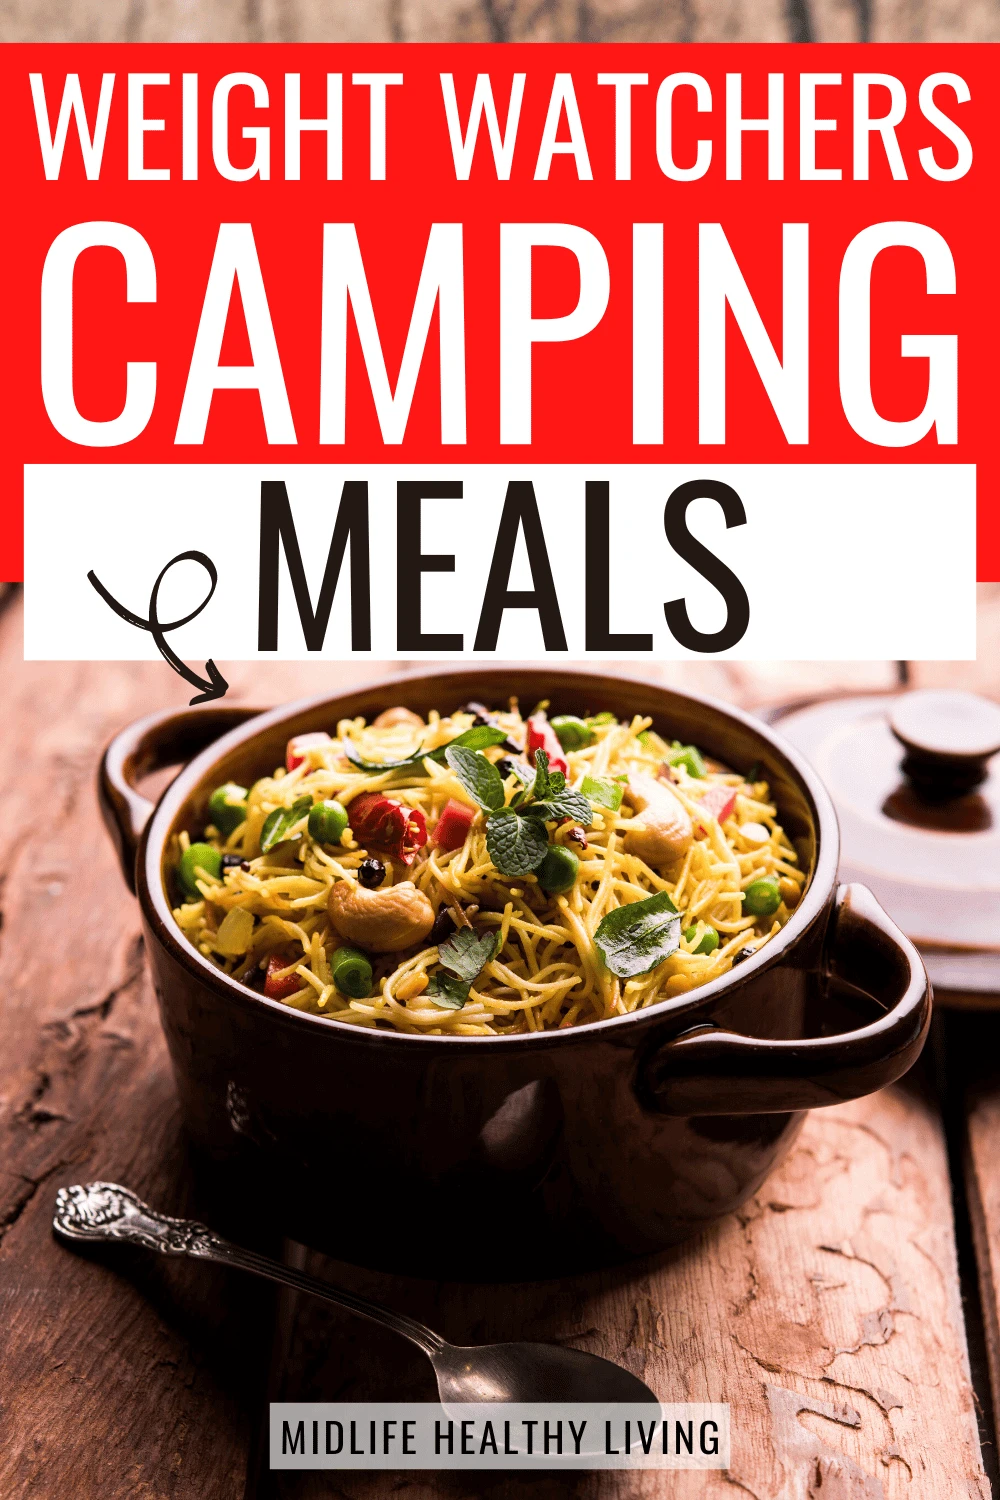 https://www.midlifehealthyliving.com/wp-content/uploads/2018/07/ww-camping-meals.png.webp